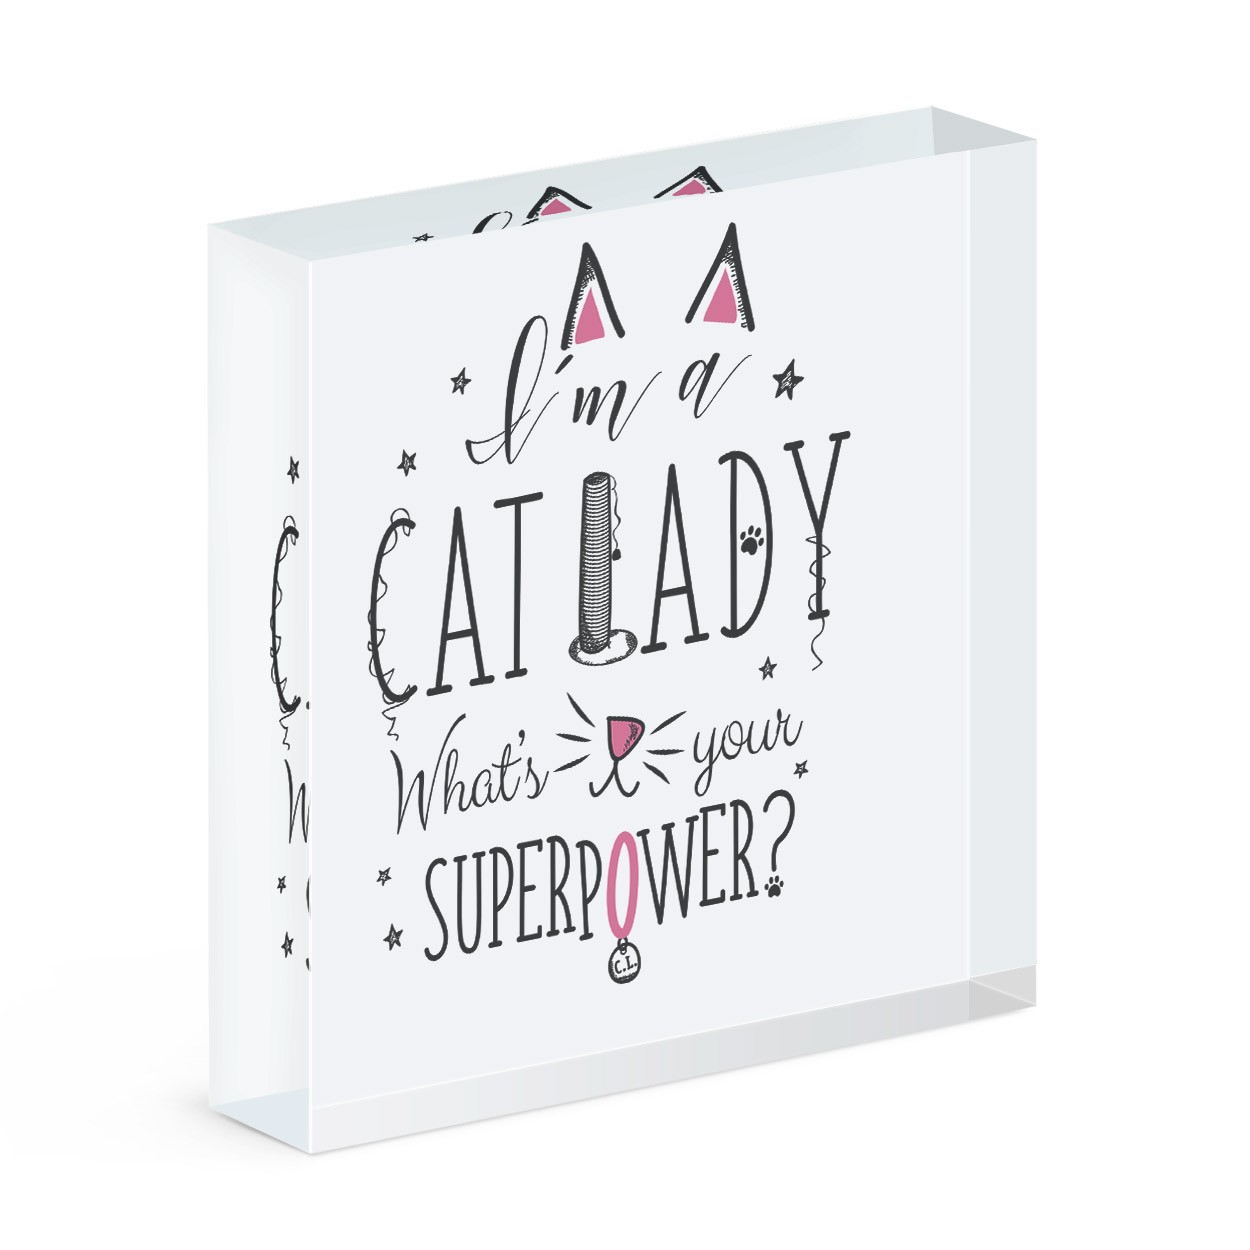 I'm A Cat Lady What's Your Superpower Acrylic Block